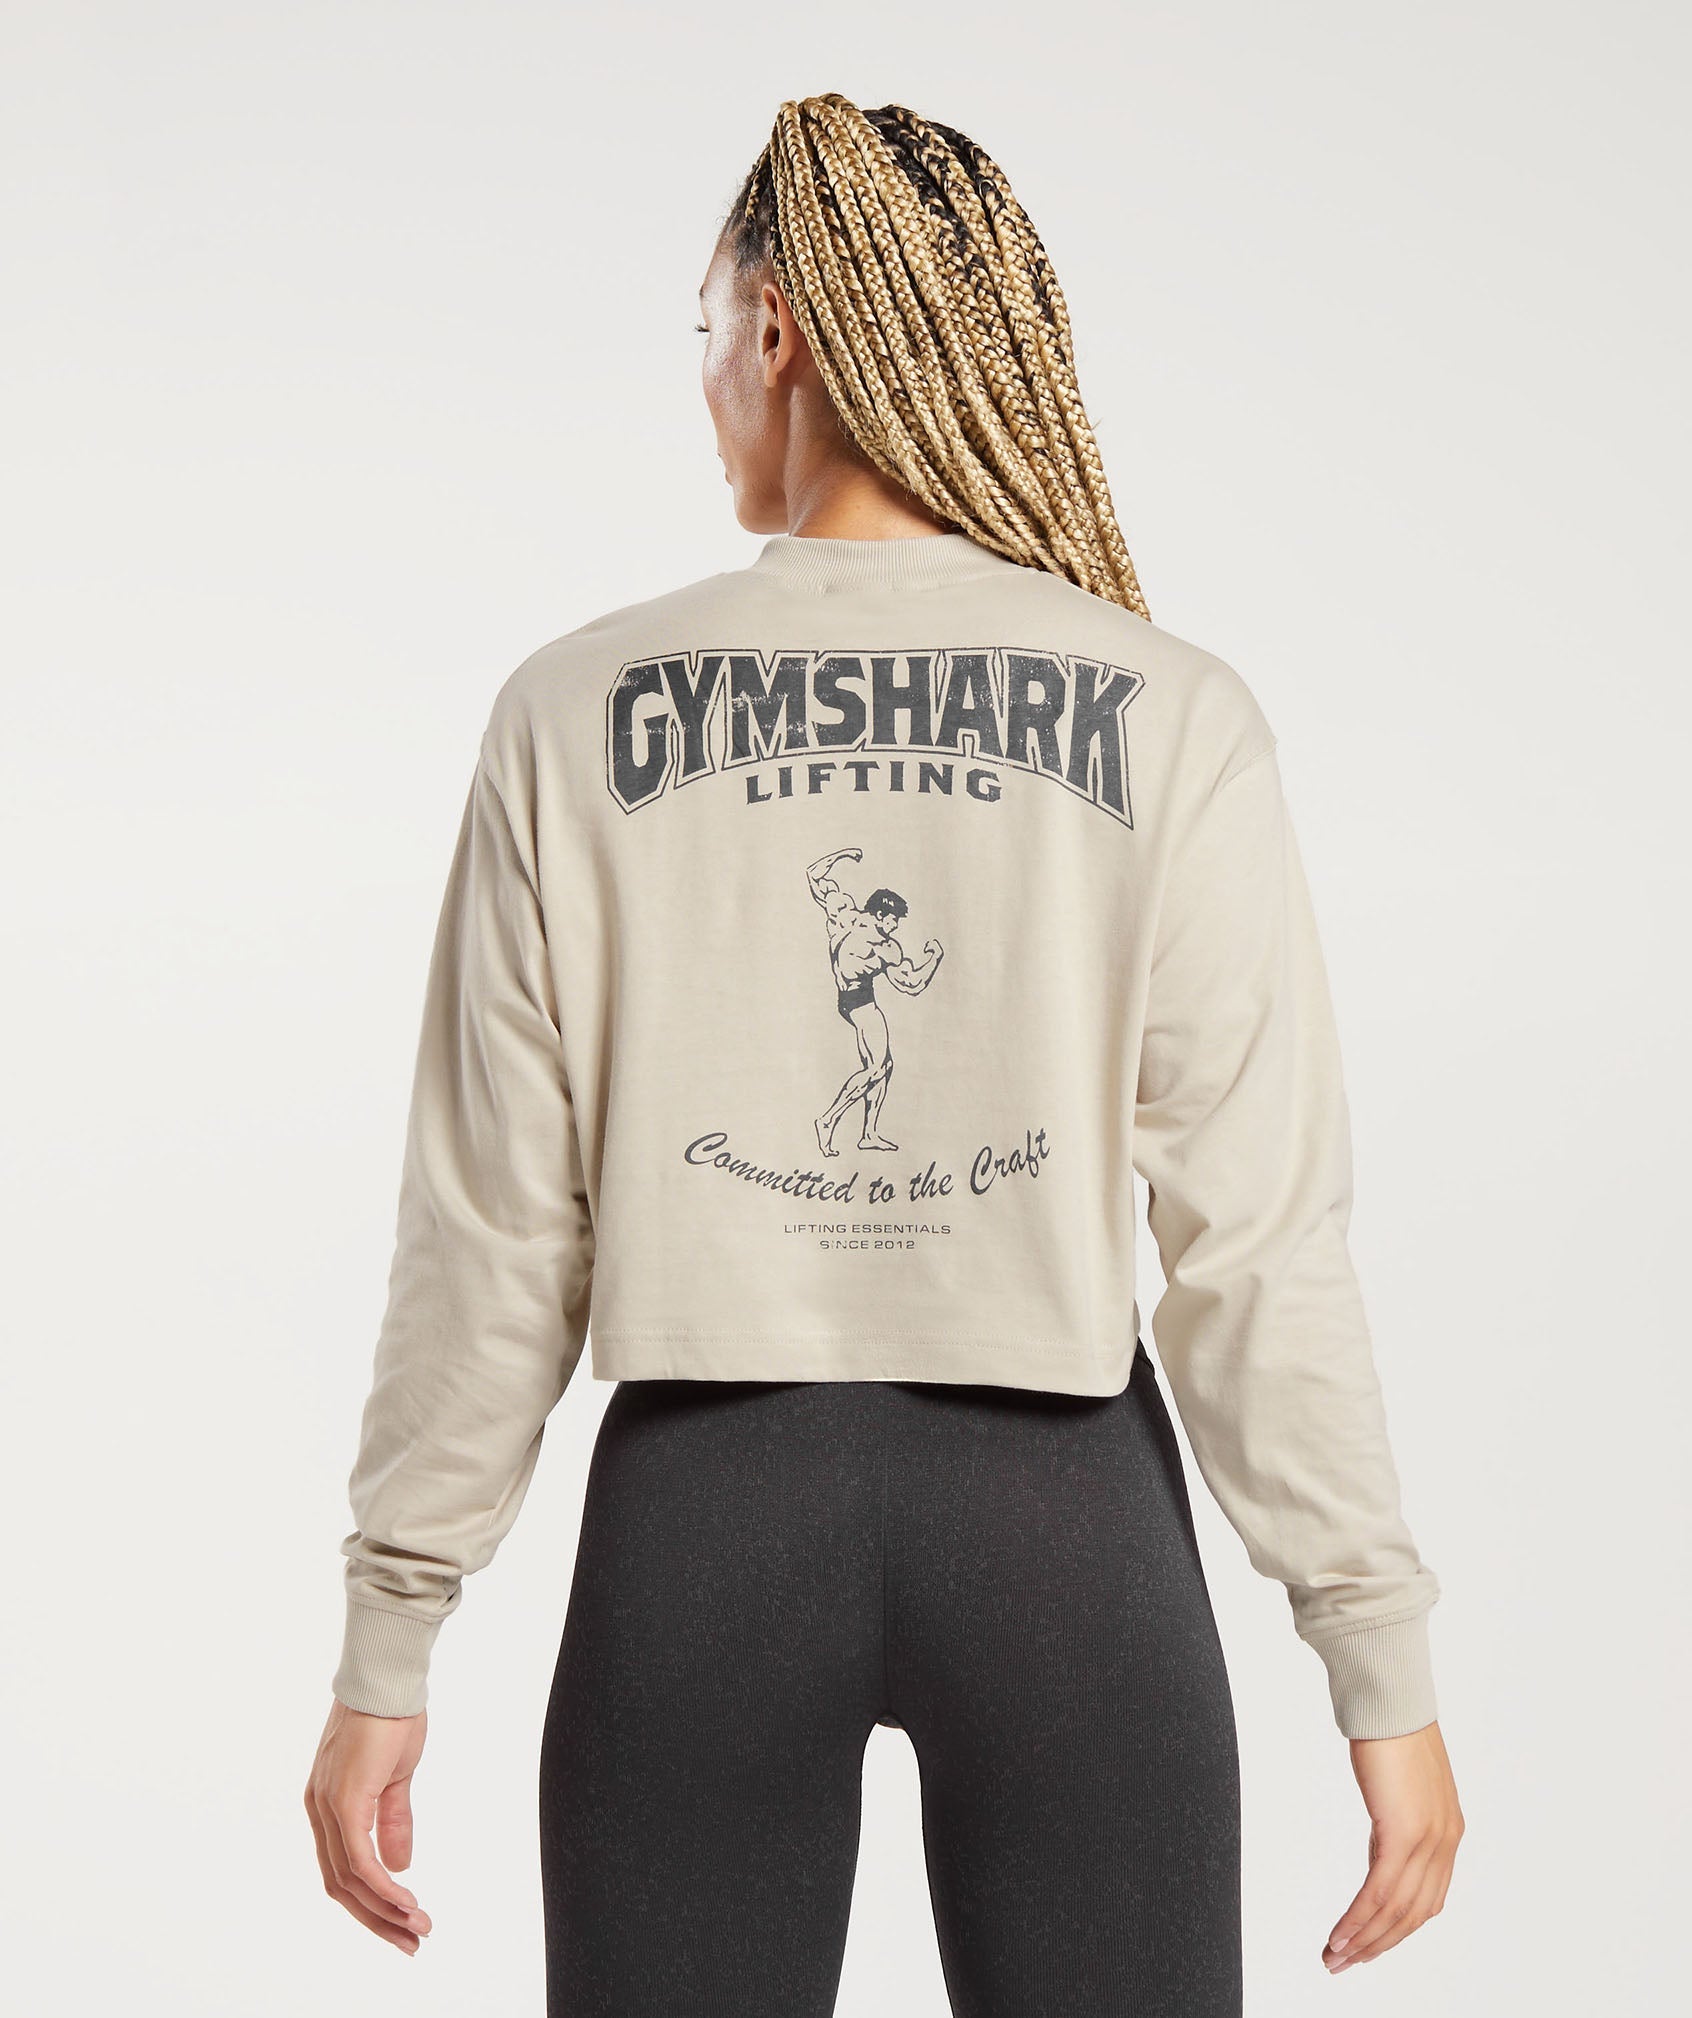 Committed To The Craft Long Sleeve Top in Brown - view 1